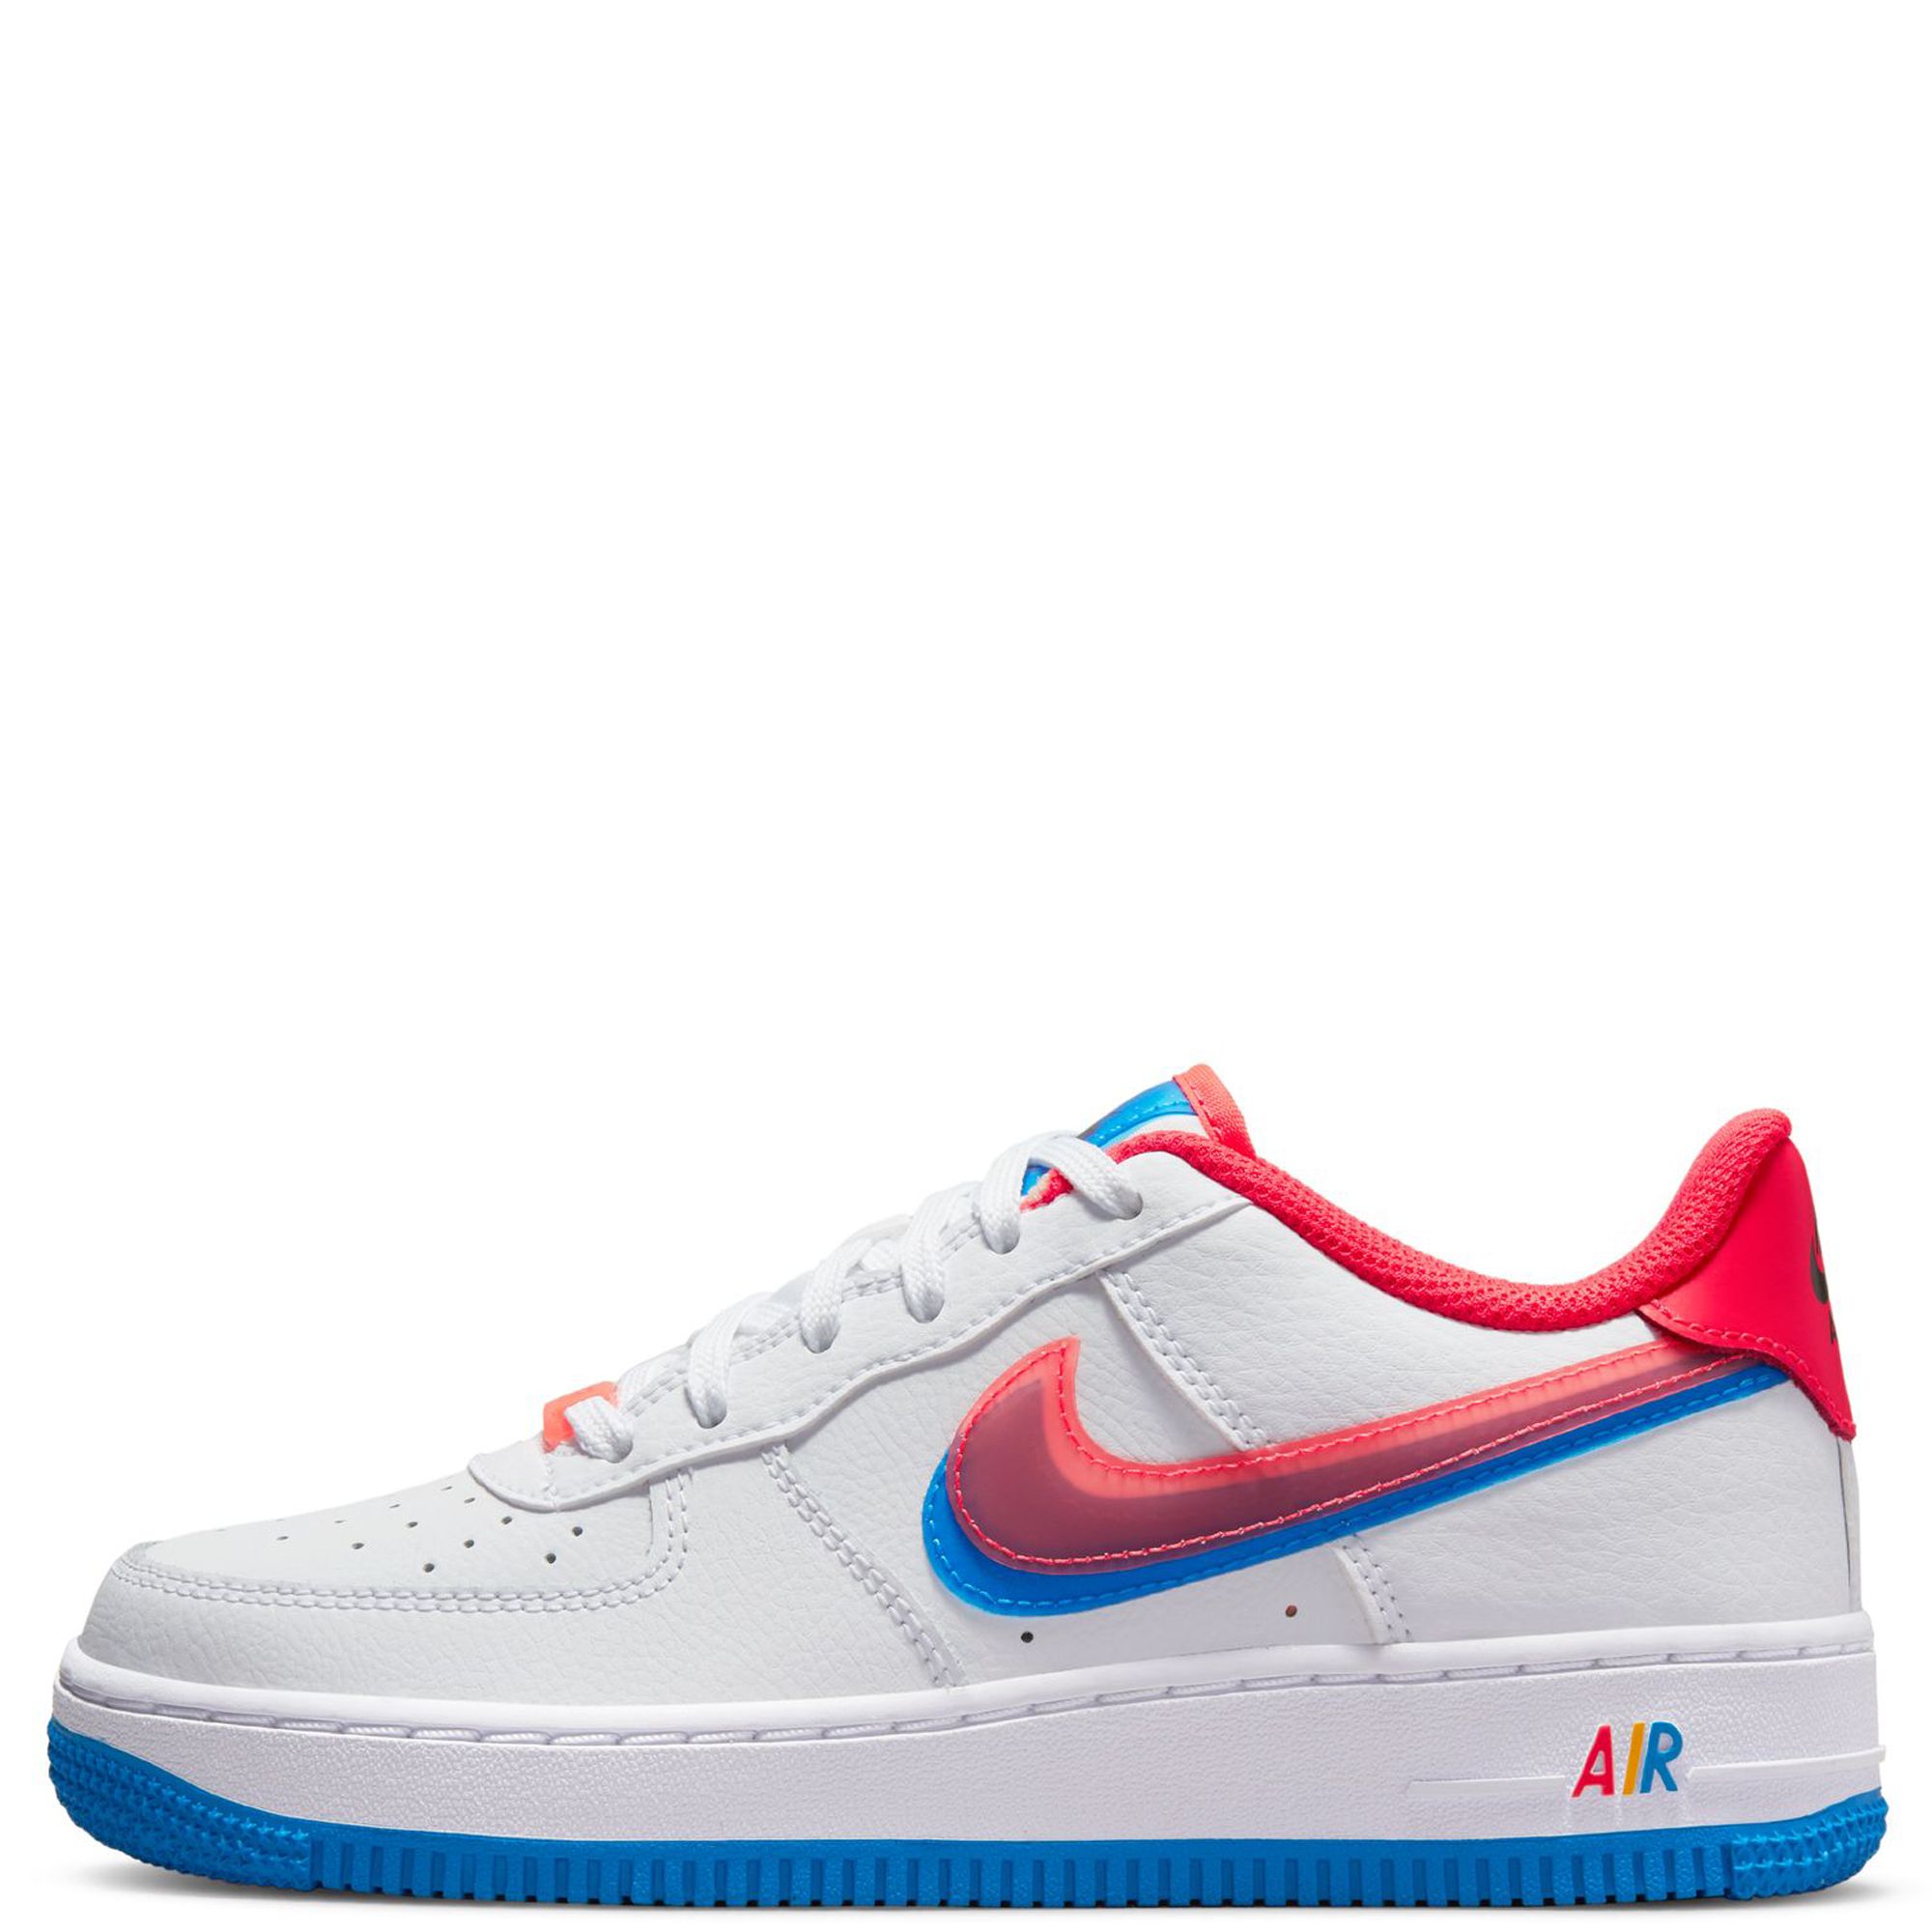 Nike Air Force 1 LV8 Grade School Lifestyle Shoes White Blue